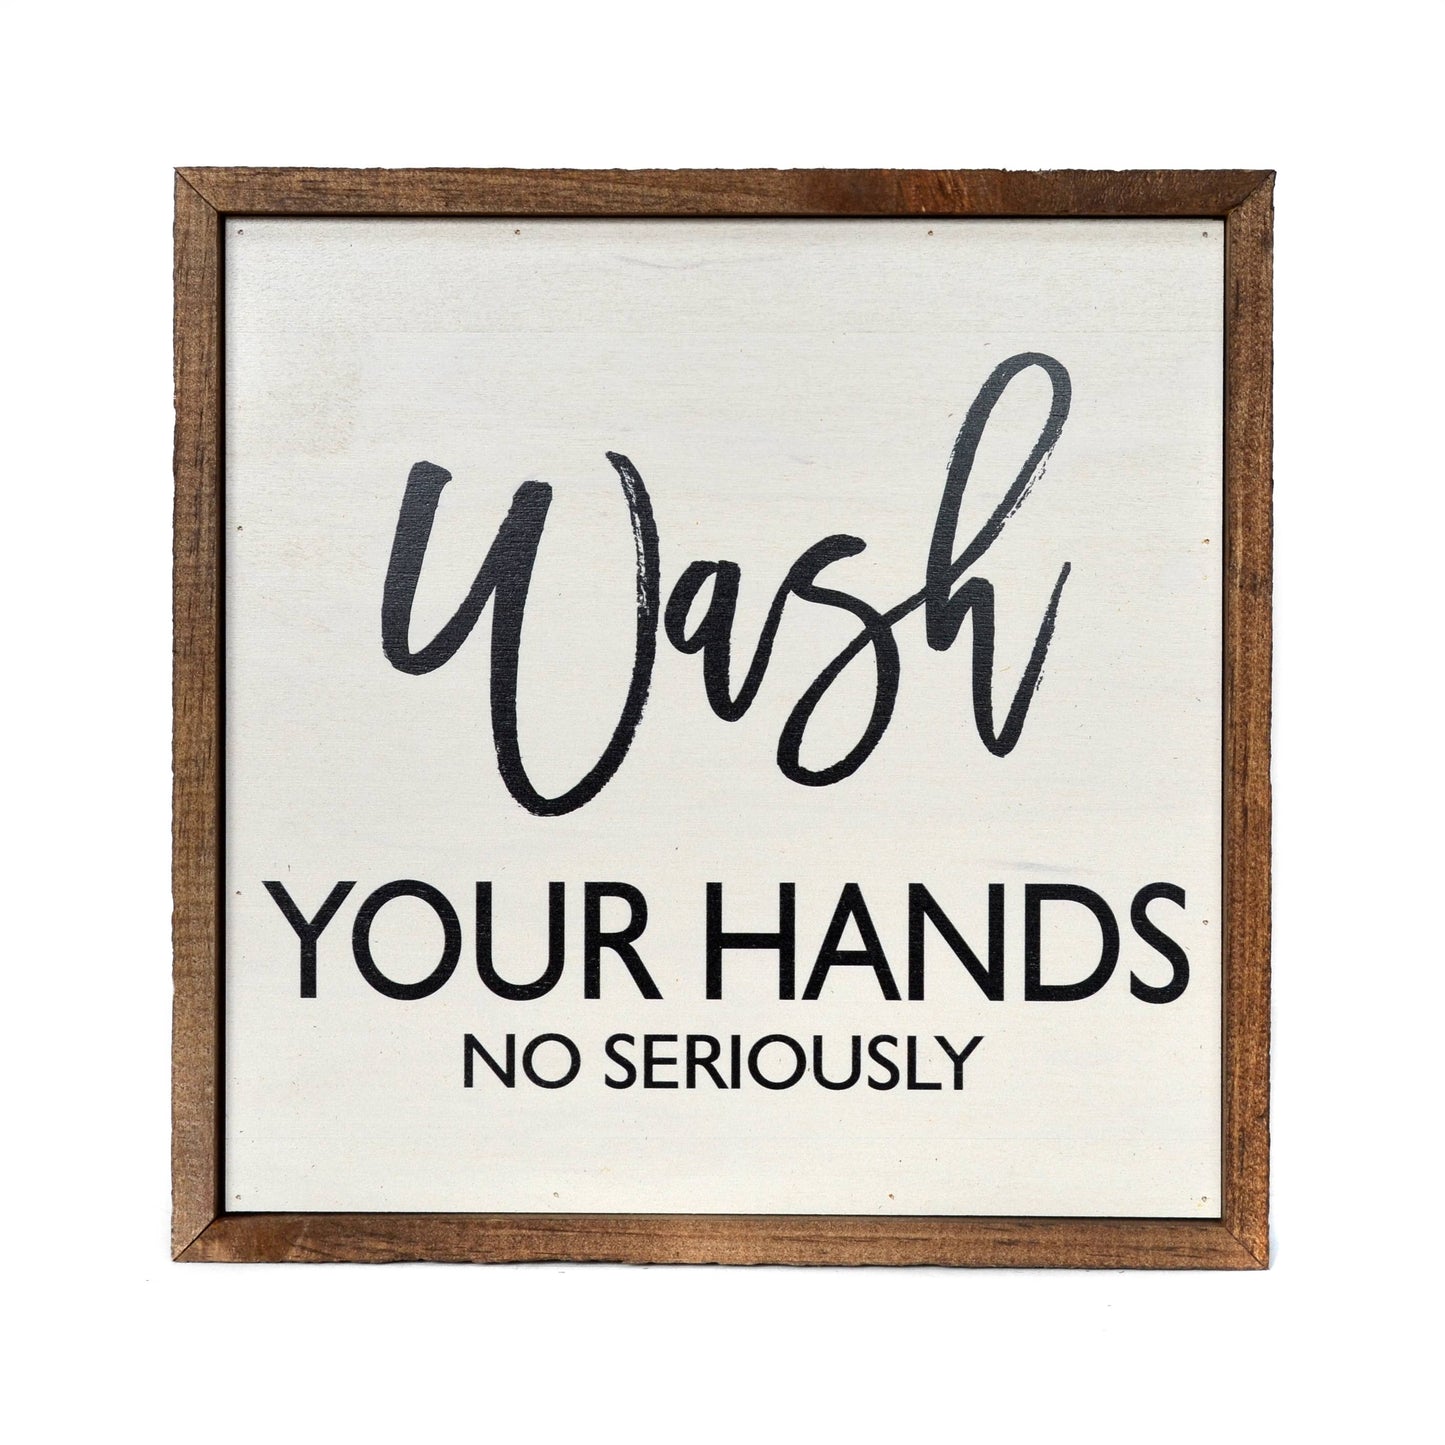 Wash Your Hands No Seriously Bathroom Wall Art Sign